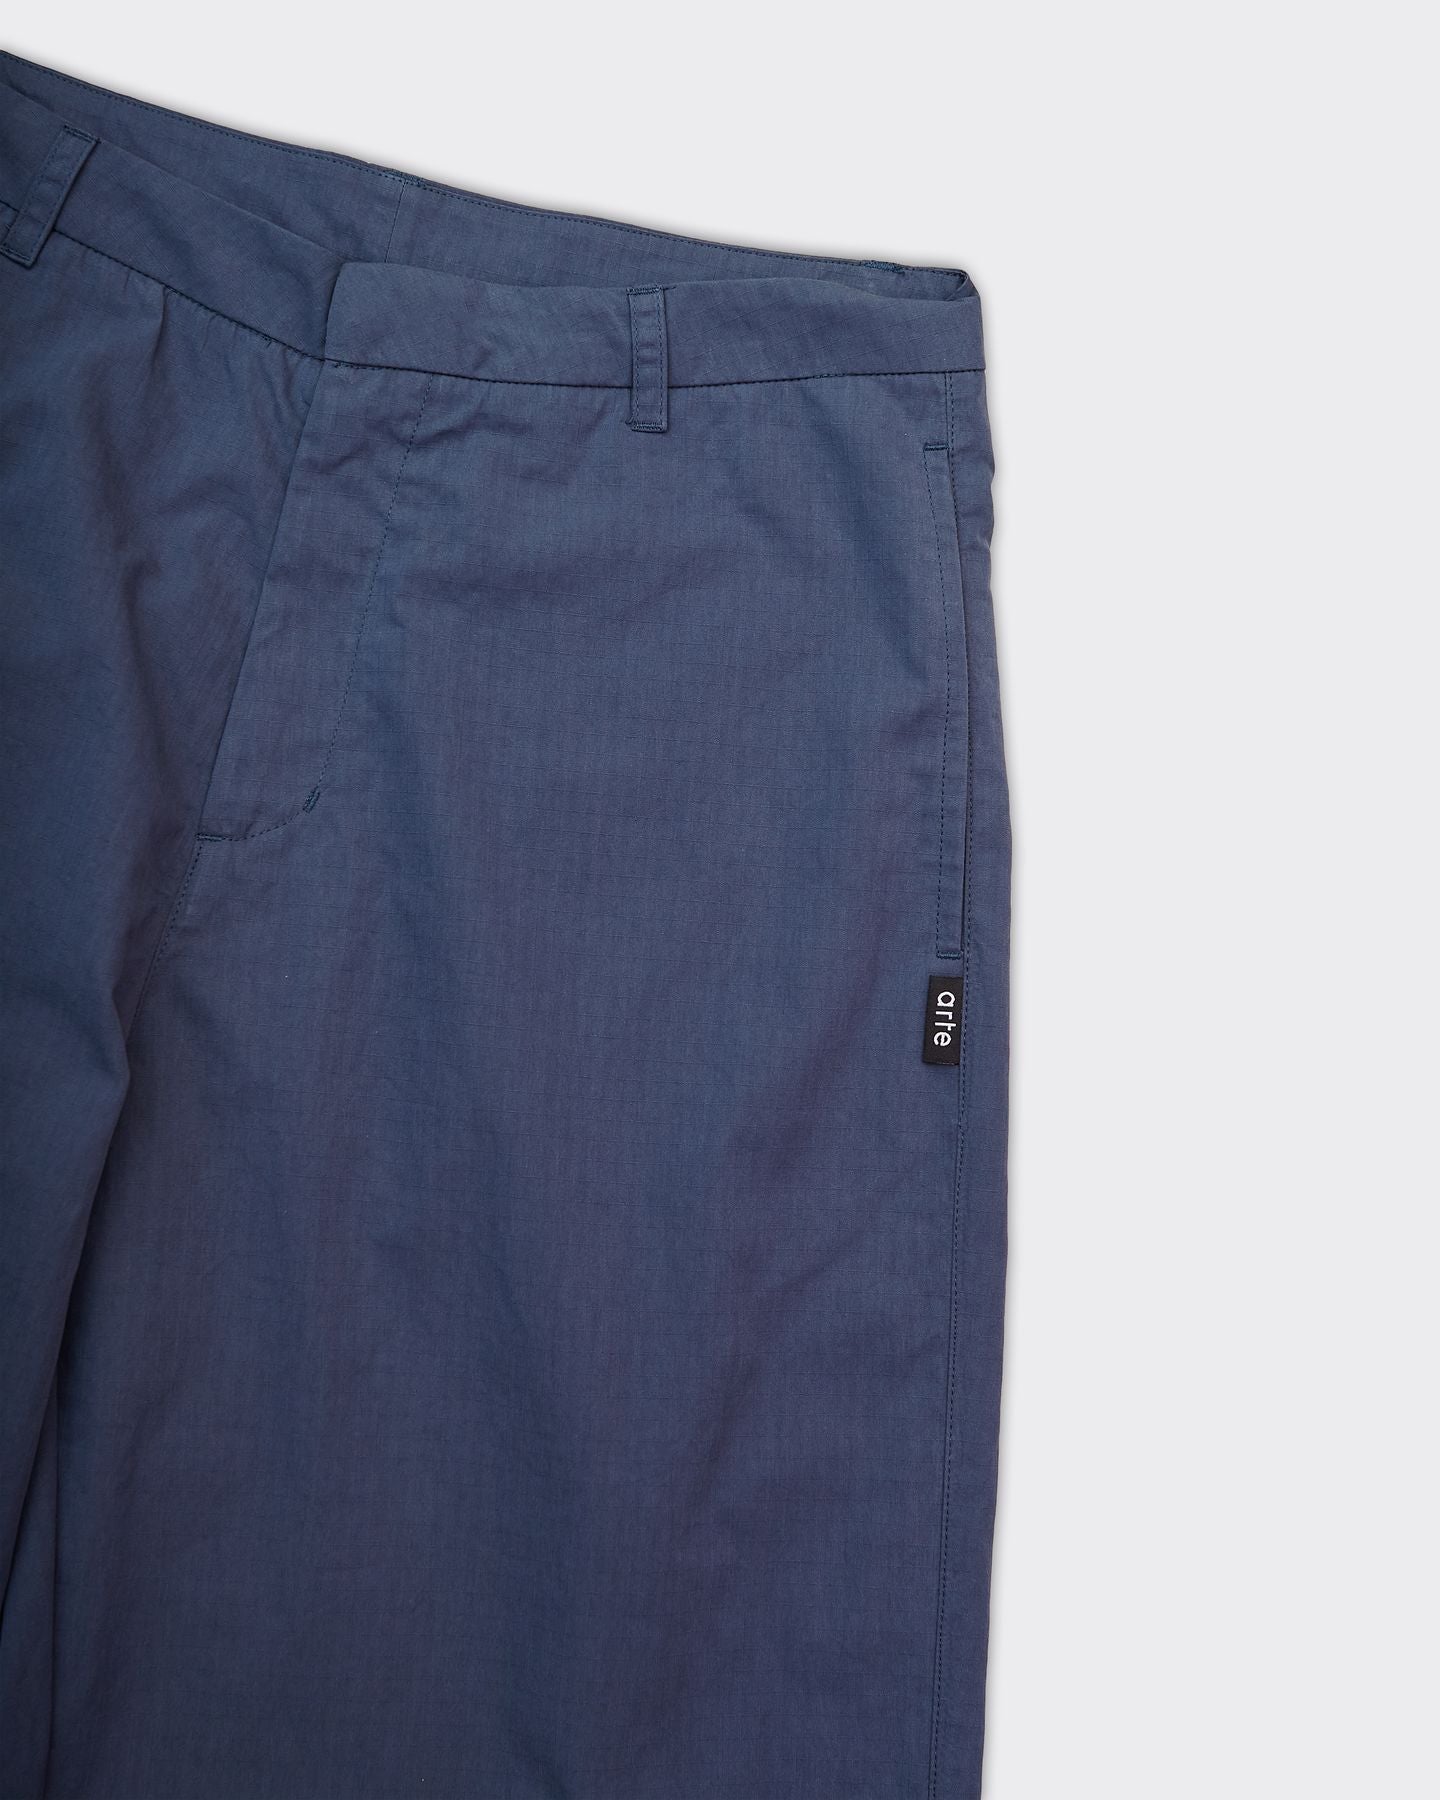 Peter Navy trousers